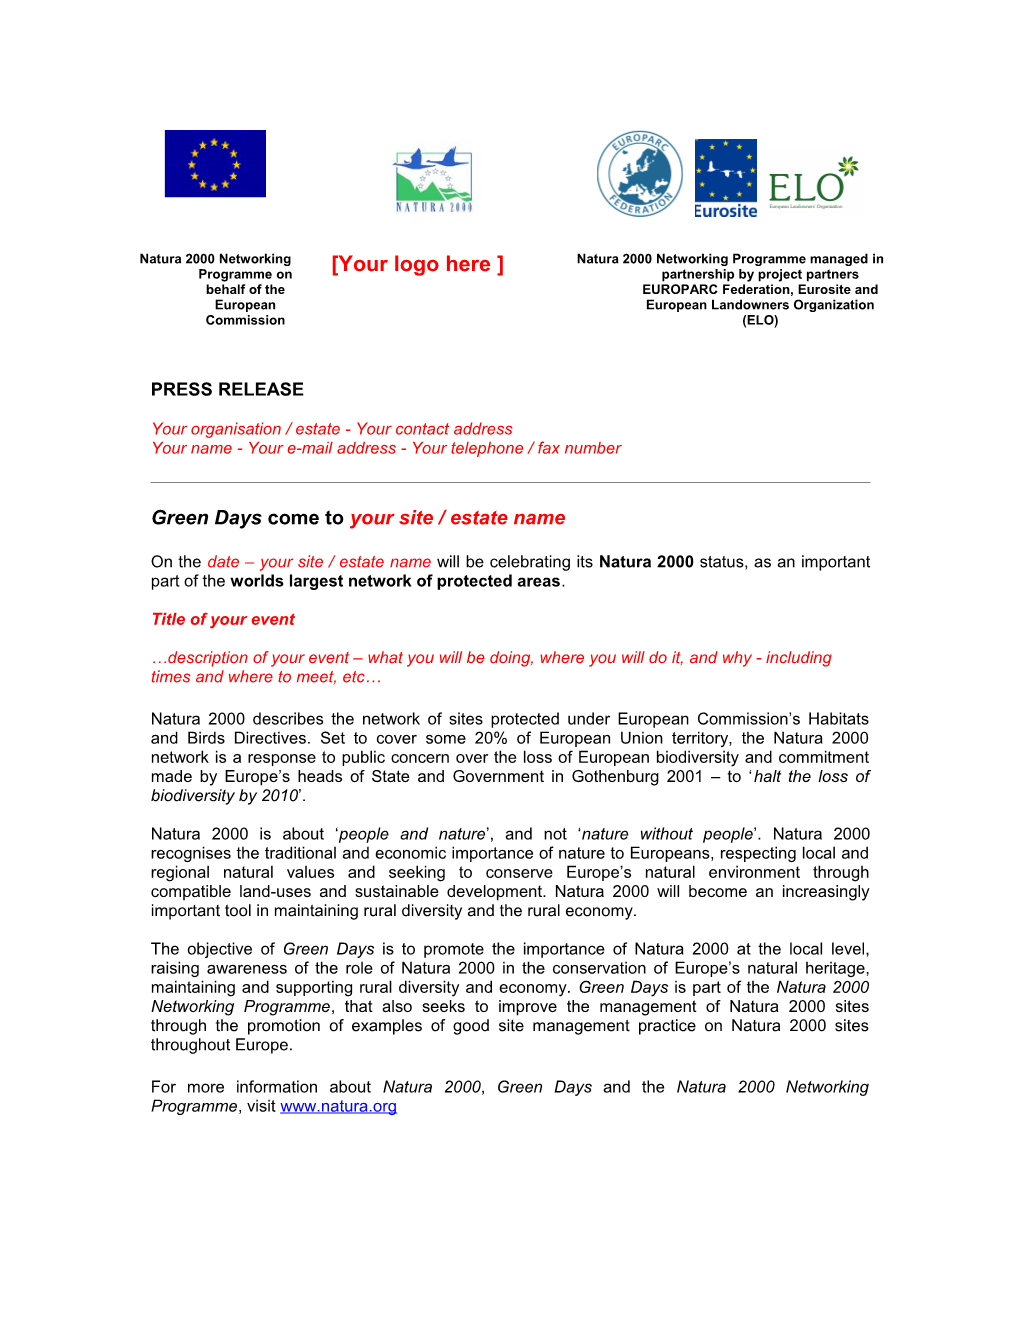 Natura 2000 Networking Programme on Behalf of the European Commission